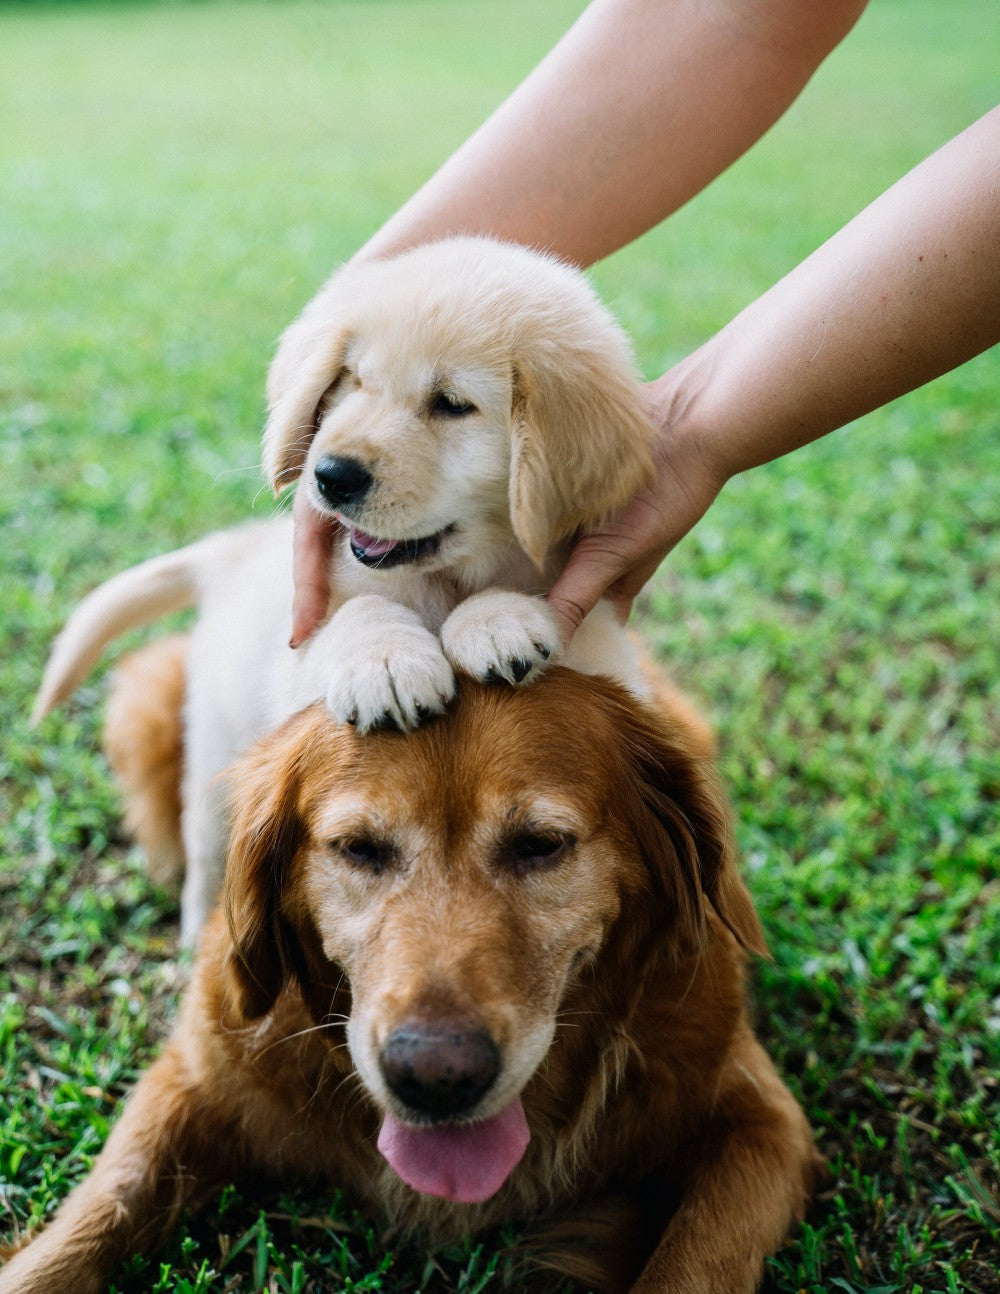 How to Introduce Puppy to a Dog by Anna Tarazevich from Pexels